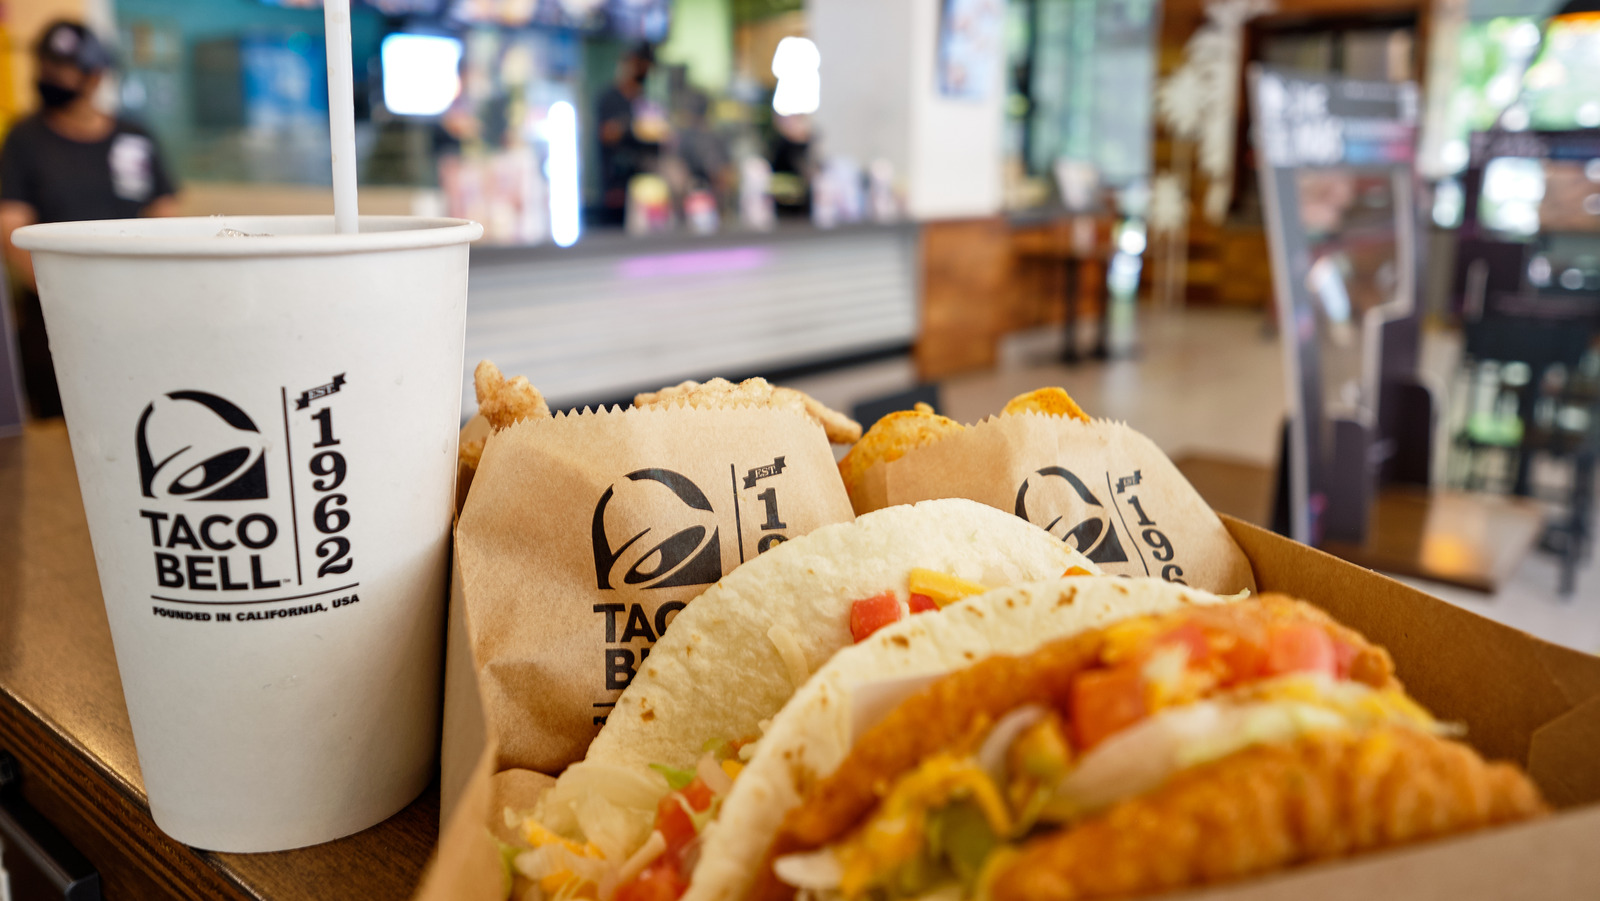 Has Taco Bell Fallen Victim To Price Inflation?